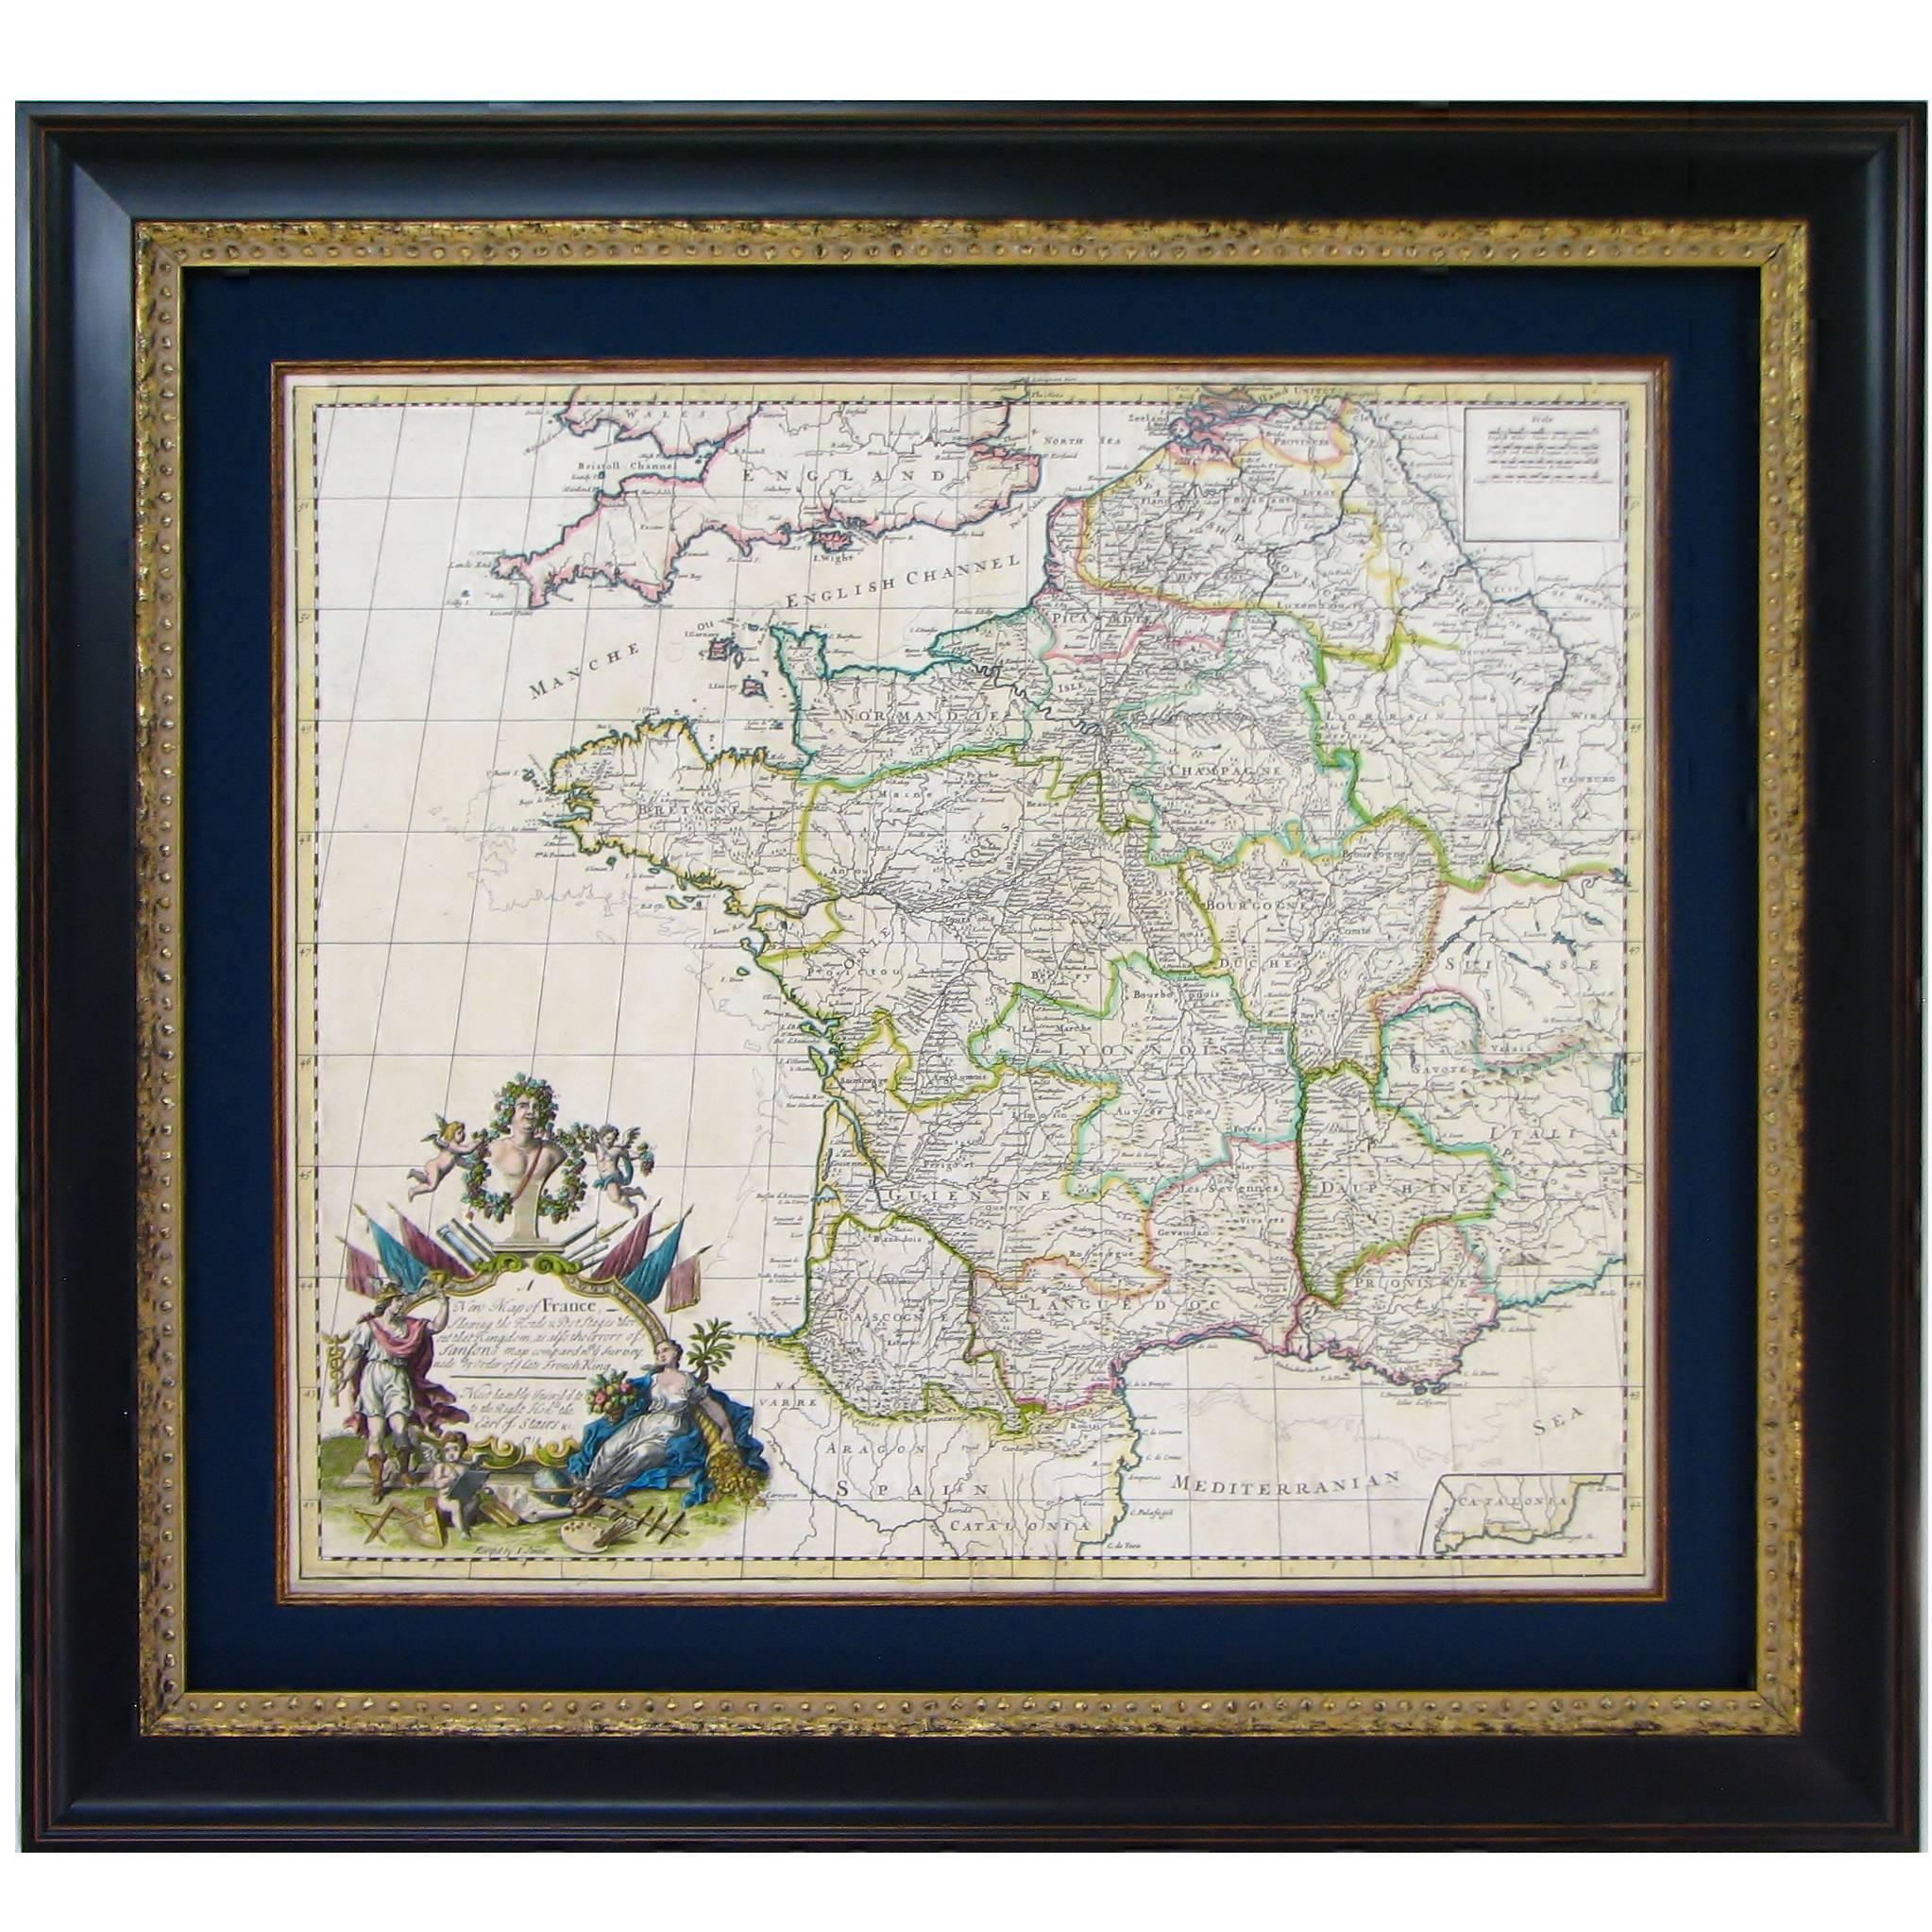 1719 Hand-Colored Map of France by John Senex